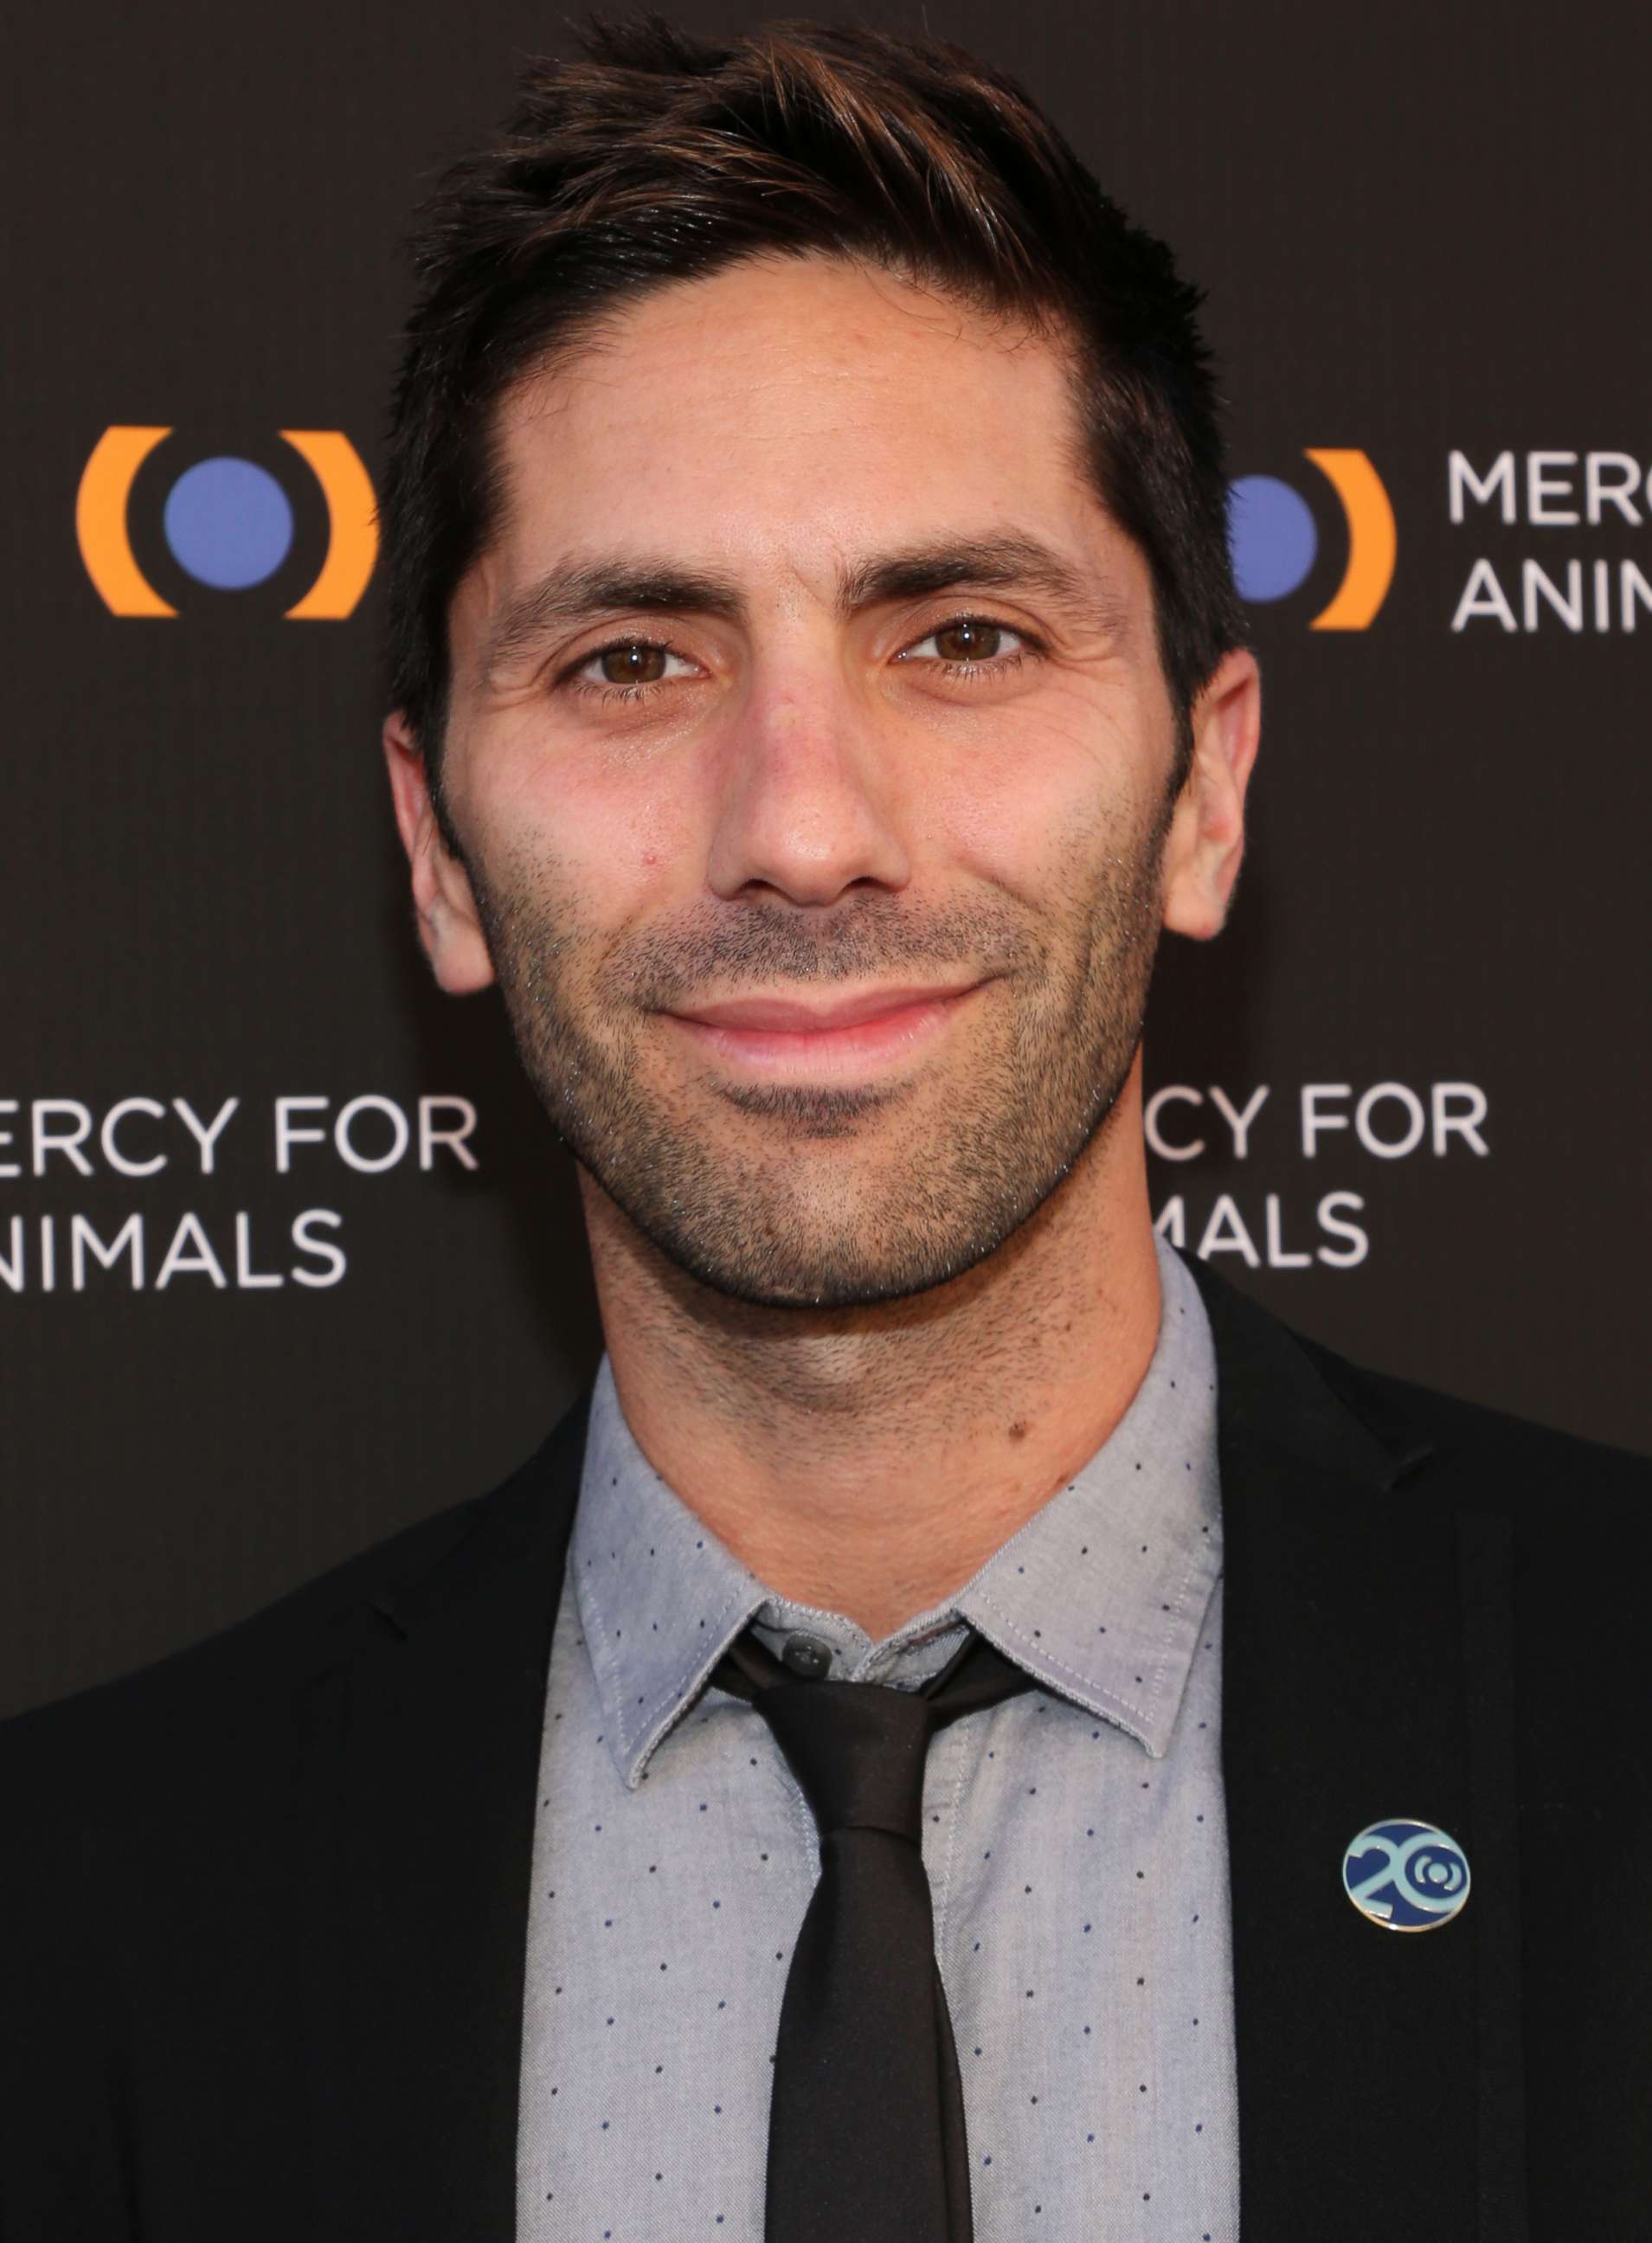 PHOTO: Nev Schulman on Sept. 14, 2019 in Los Angeles.